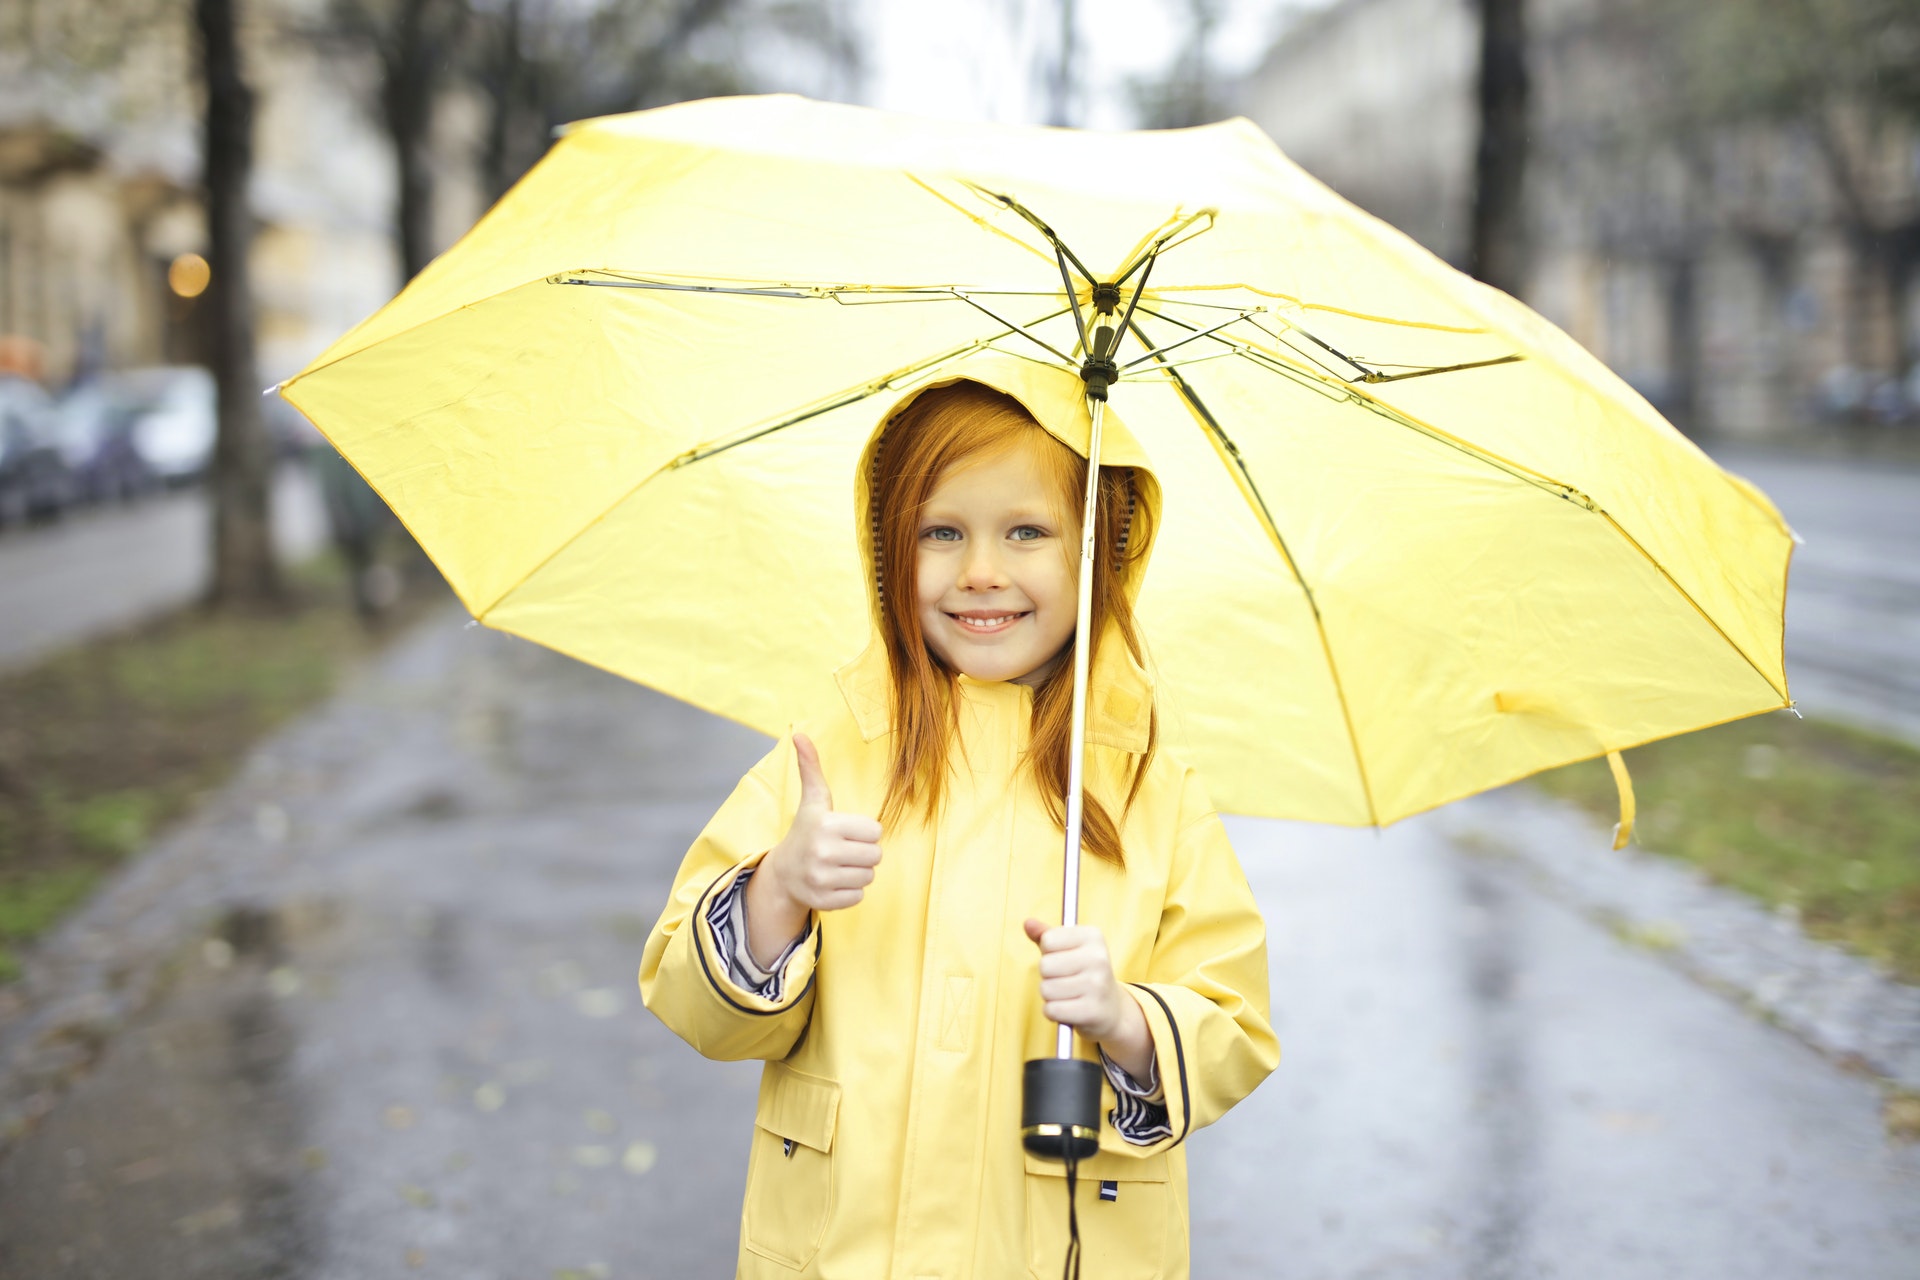 Photo of Smiling Girl in Yellow Raincoat Holding a Yellow Umbrella While Giving One Thumbs Up